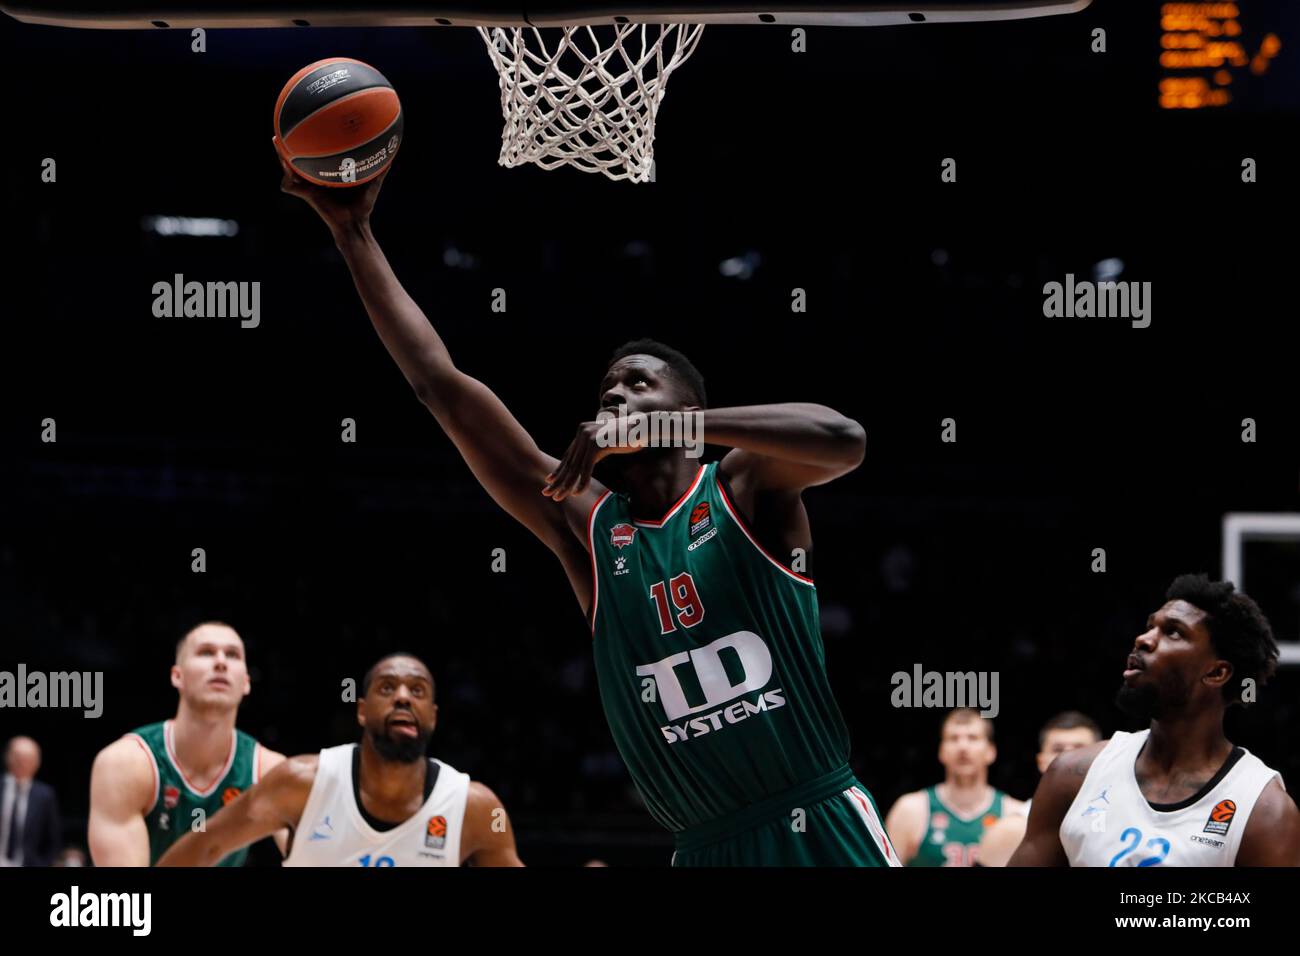 Youssoupha Fall (C) of Baskonia in action during the EuroLeague Basketball match between Zenit St. Petersburg and TD Systems Baskonia Vitoria-Gasteiz on March 18, 2021 at Yubileyny Sports Palace in Saint Petersburg, Russia. (Photo by Mike Kireev/NurPhoto) Stock Photo